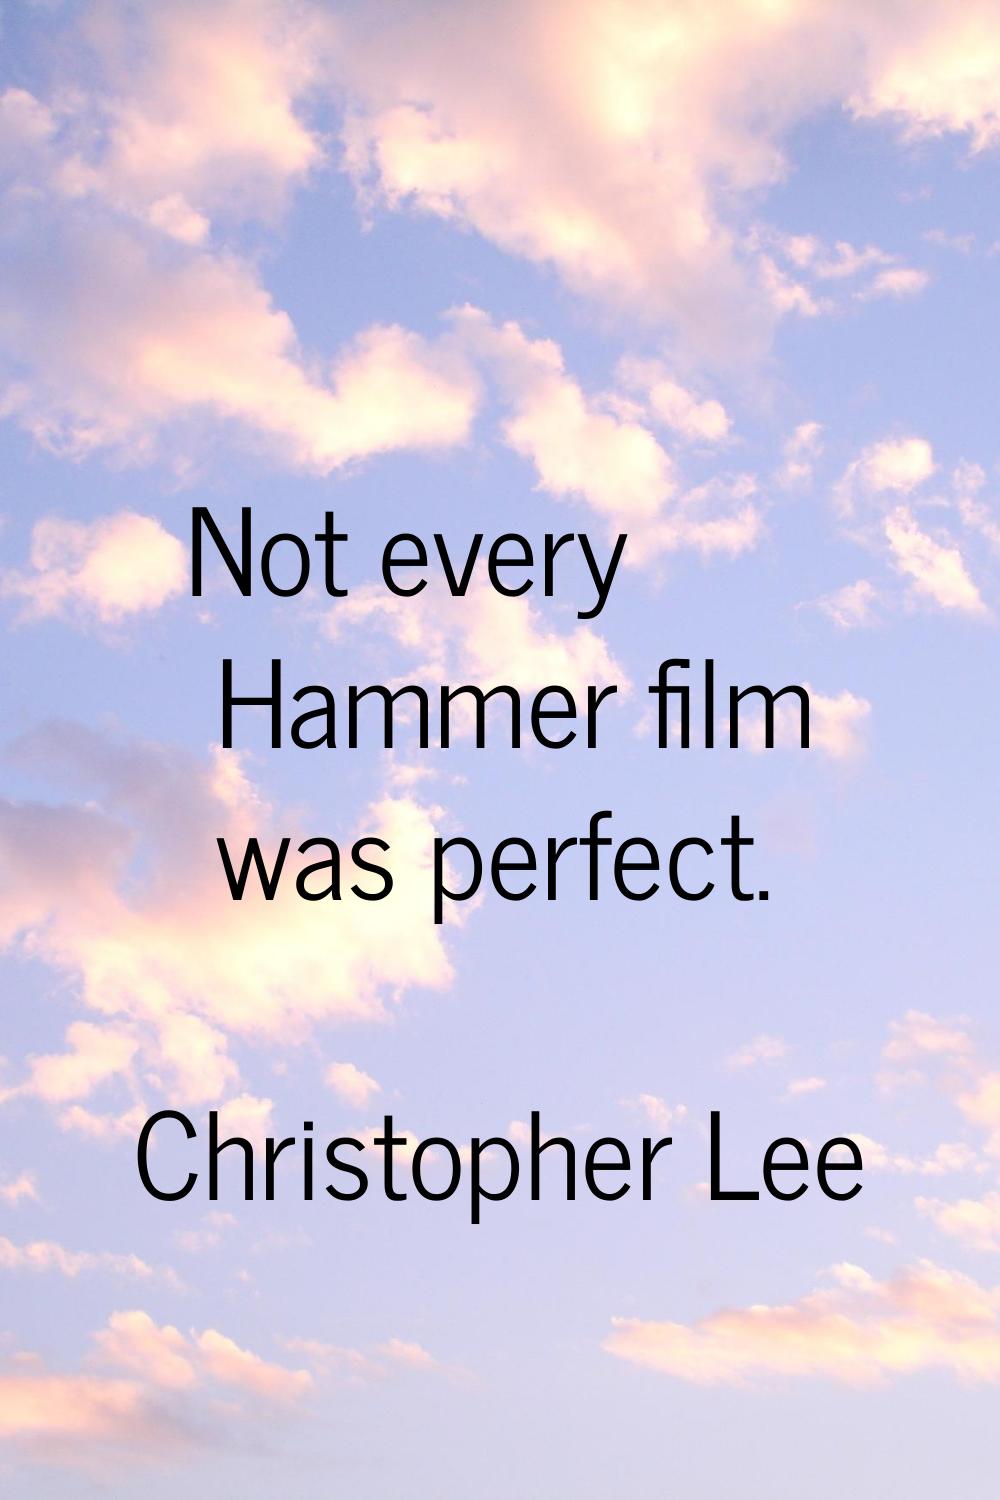 Not every Hammer film was perfect.